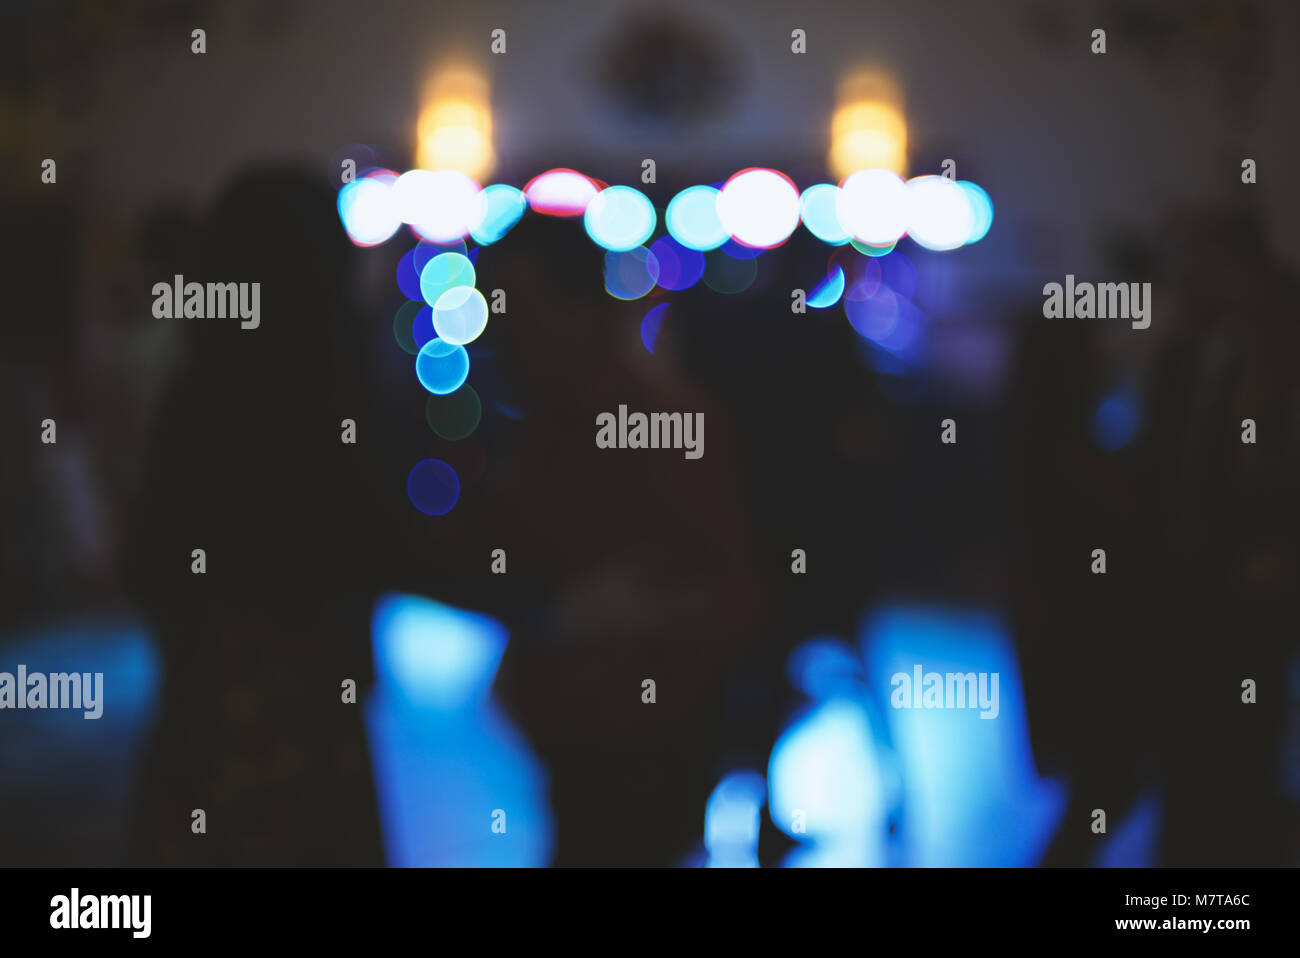 Blurry colorful background, light at a dance party, designer background for text overlay Stock Photo